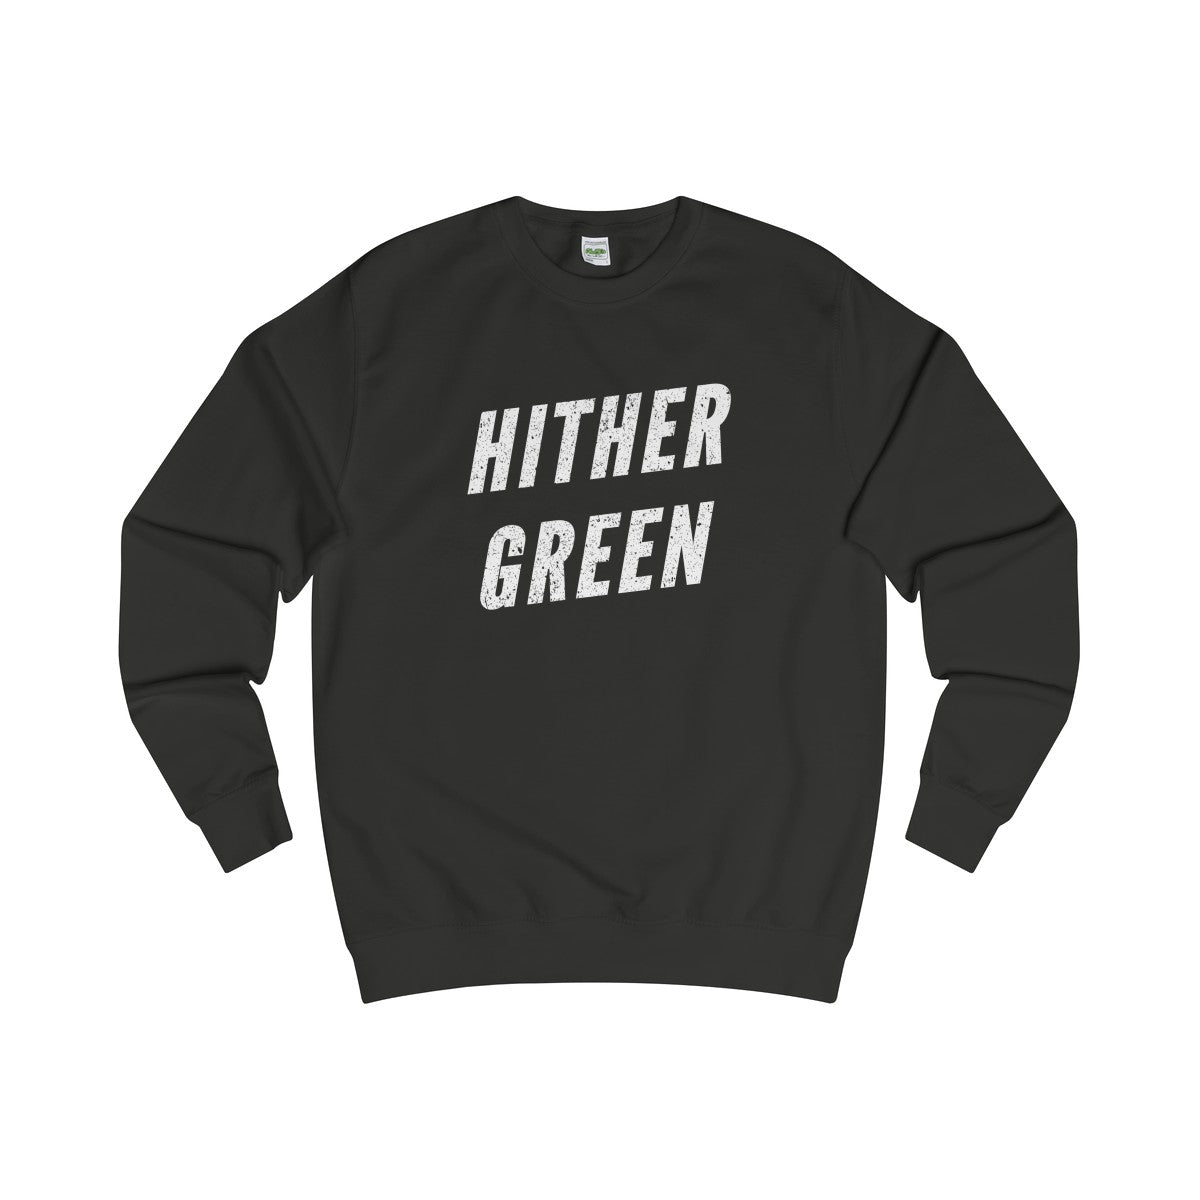 Hither Green Sweater